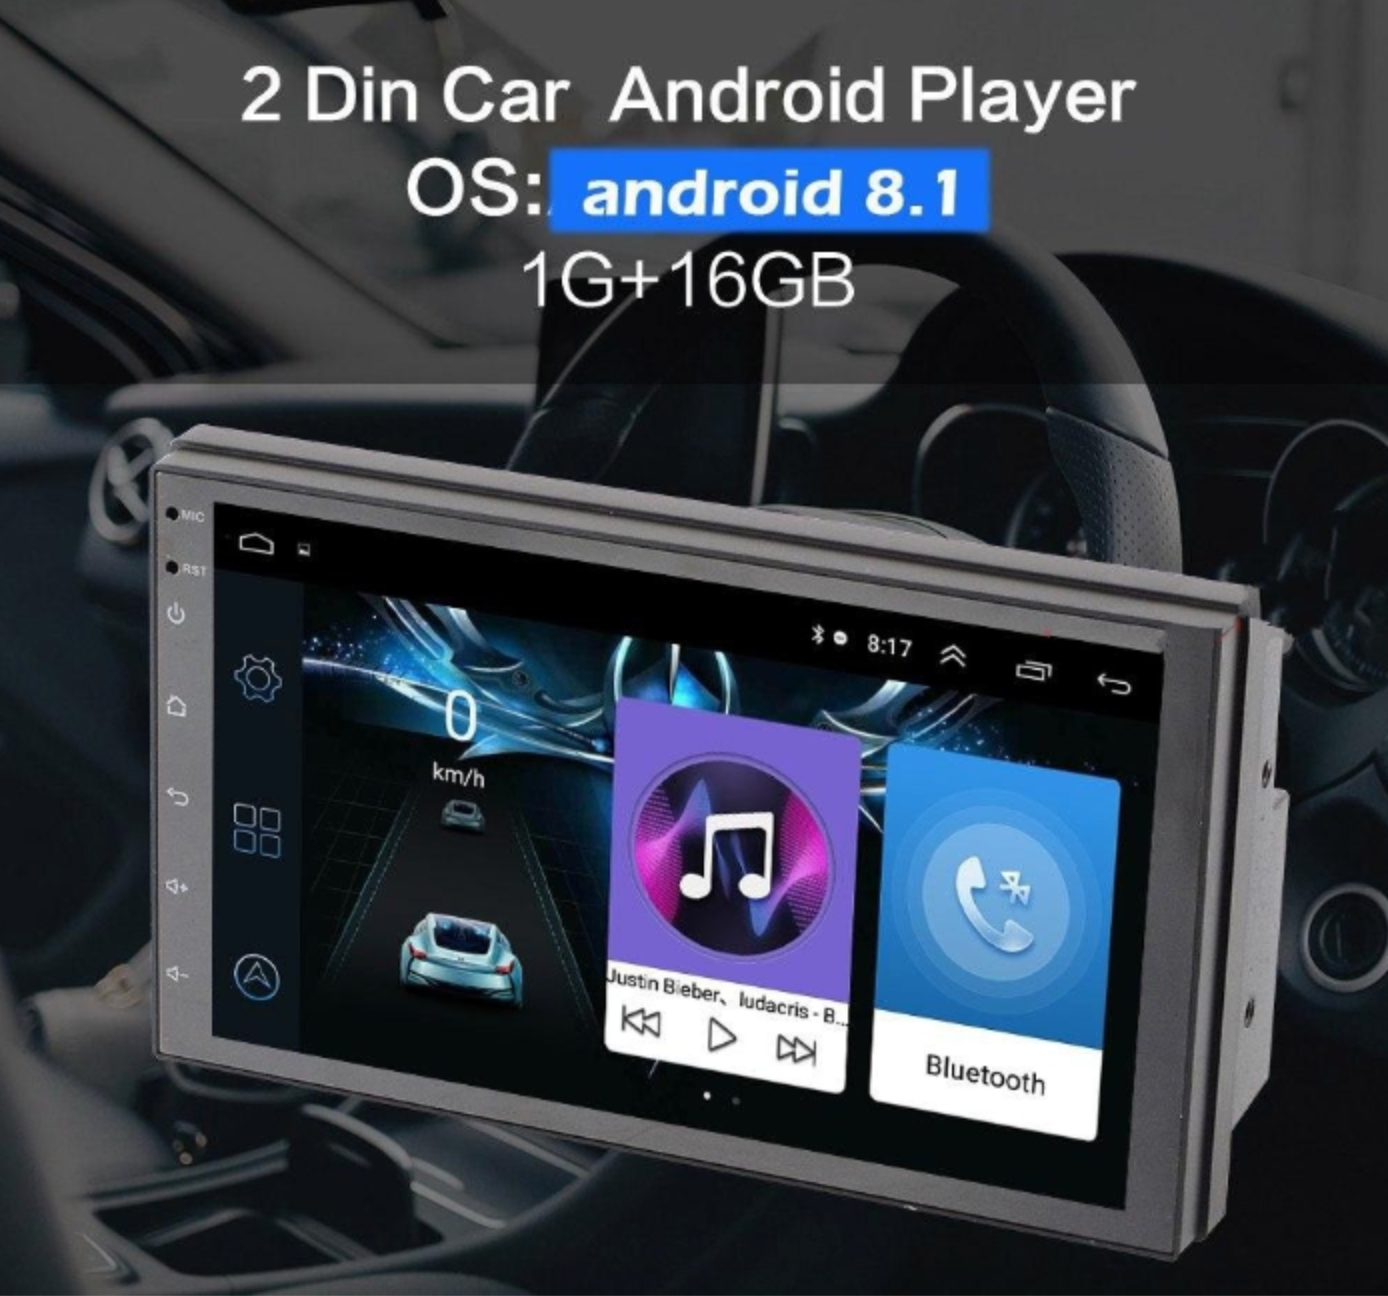 **SPECIAL!** Android 8.1 Car Stereo 2 DIN 7” + Compatible with Toyota Harness, Camera, GPS Navigation, Bluetooth, USB